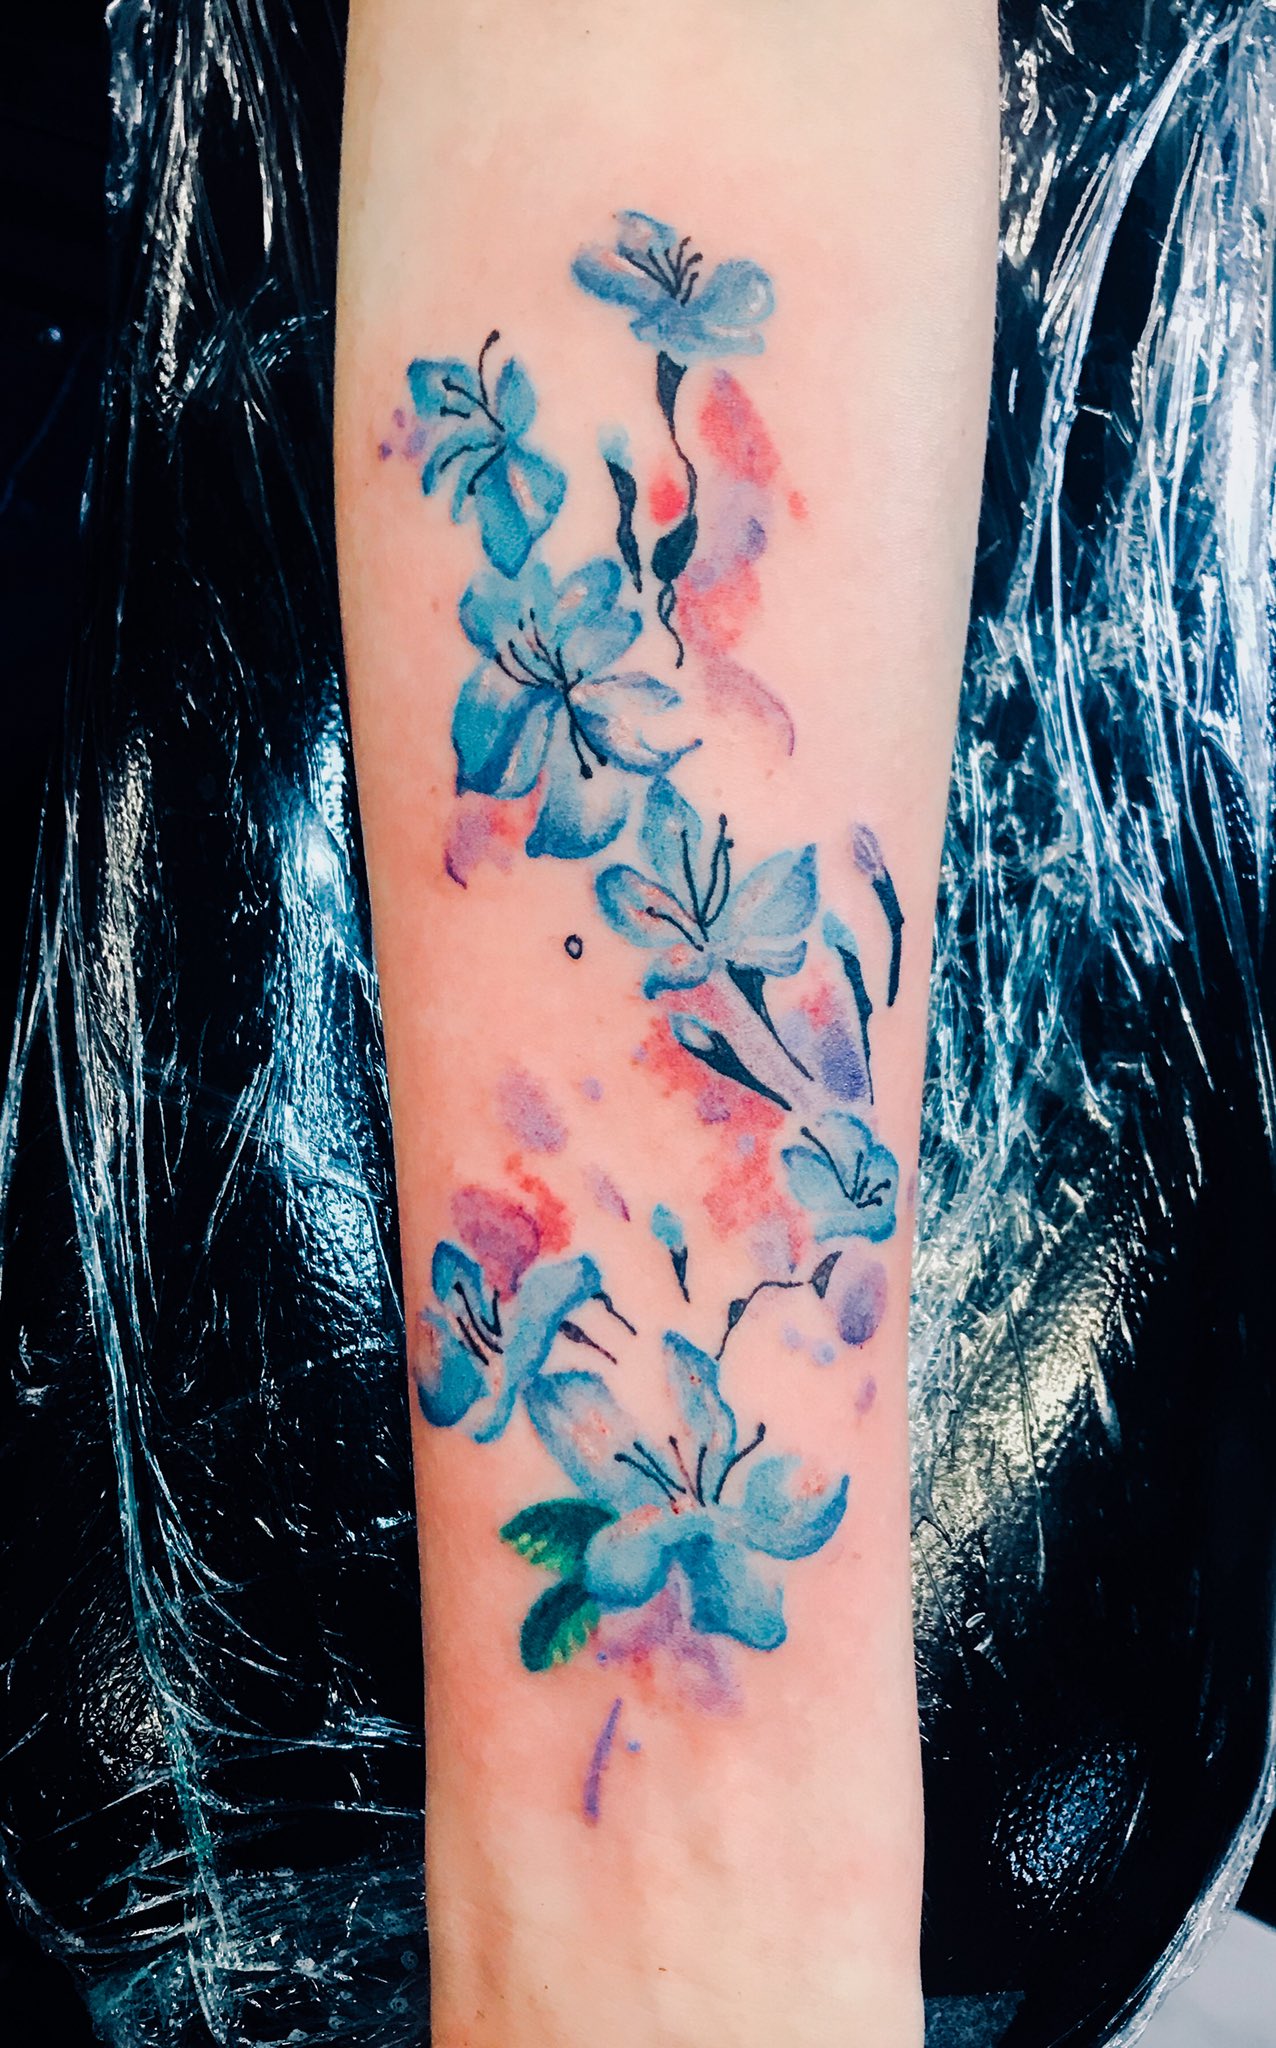 Organic Pattern and Forget me not flowers tattoo  Flickr